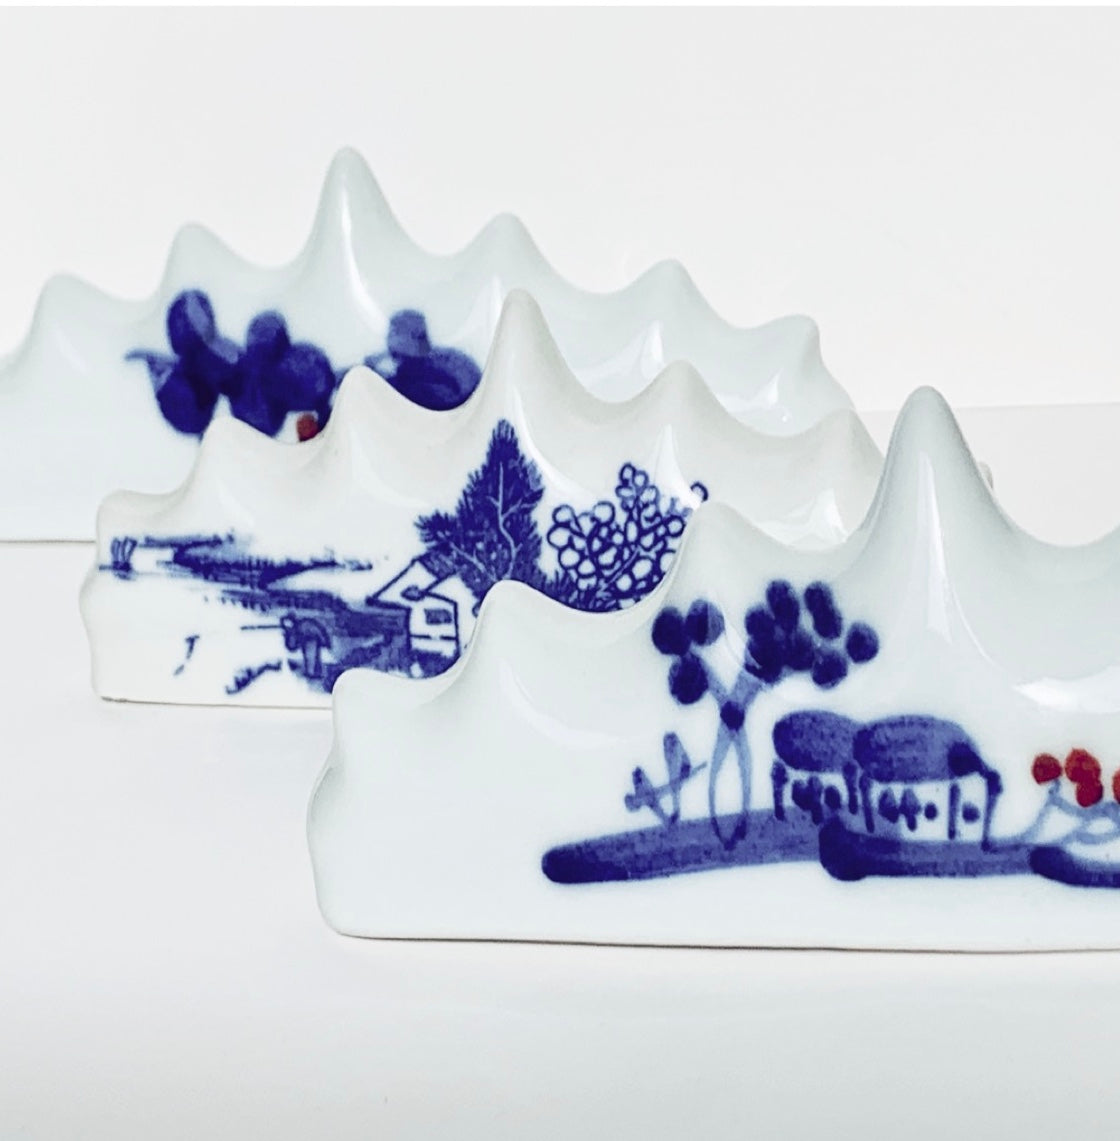 Chinese traditional porcelain brush rest printed on landscape